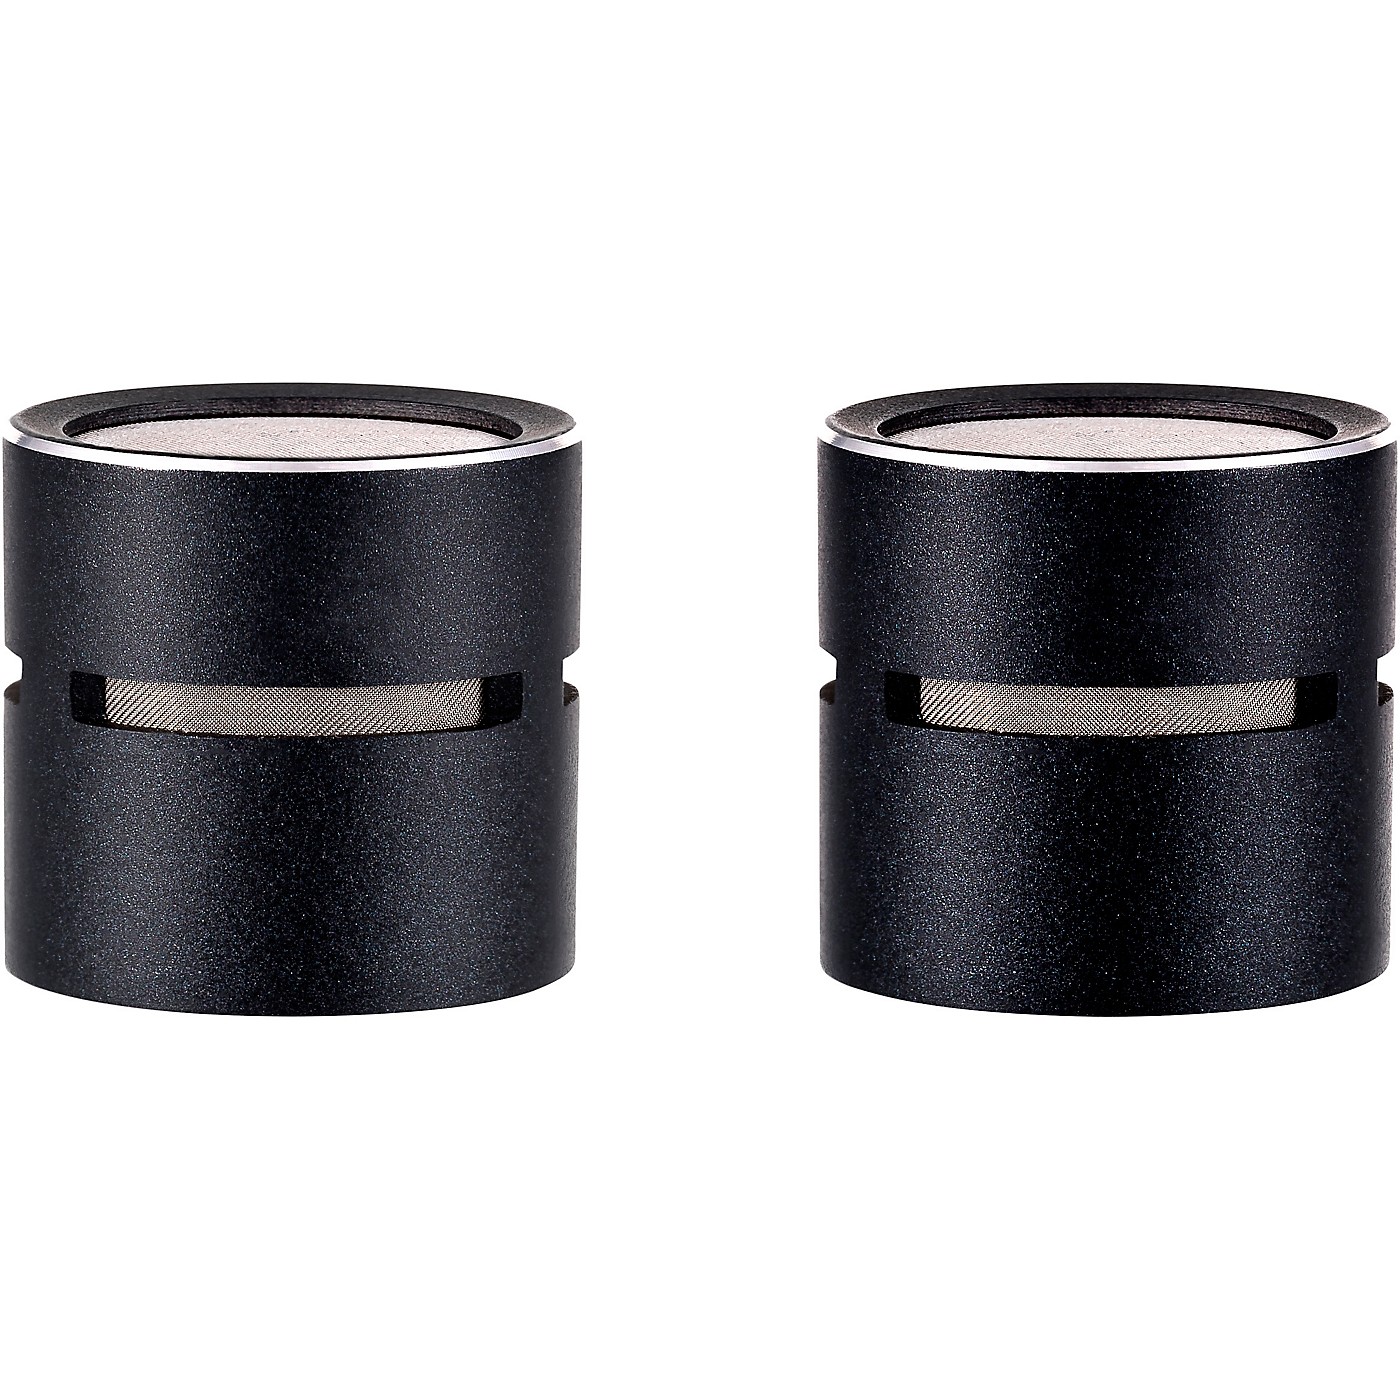 sE Electronics Factory Matched Pair of Cardioid Pattern Capsules for sE8 Microphones thumbnail